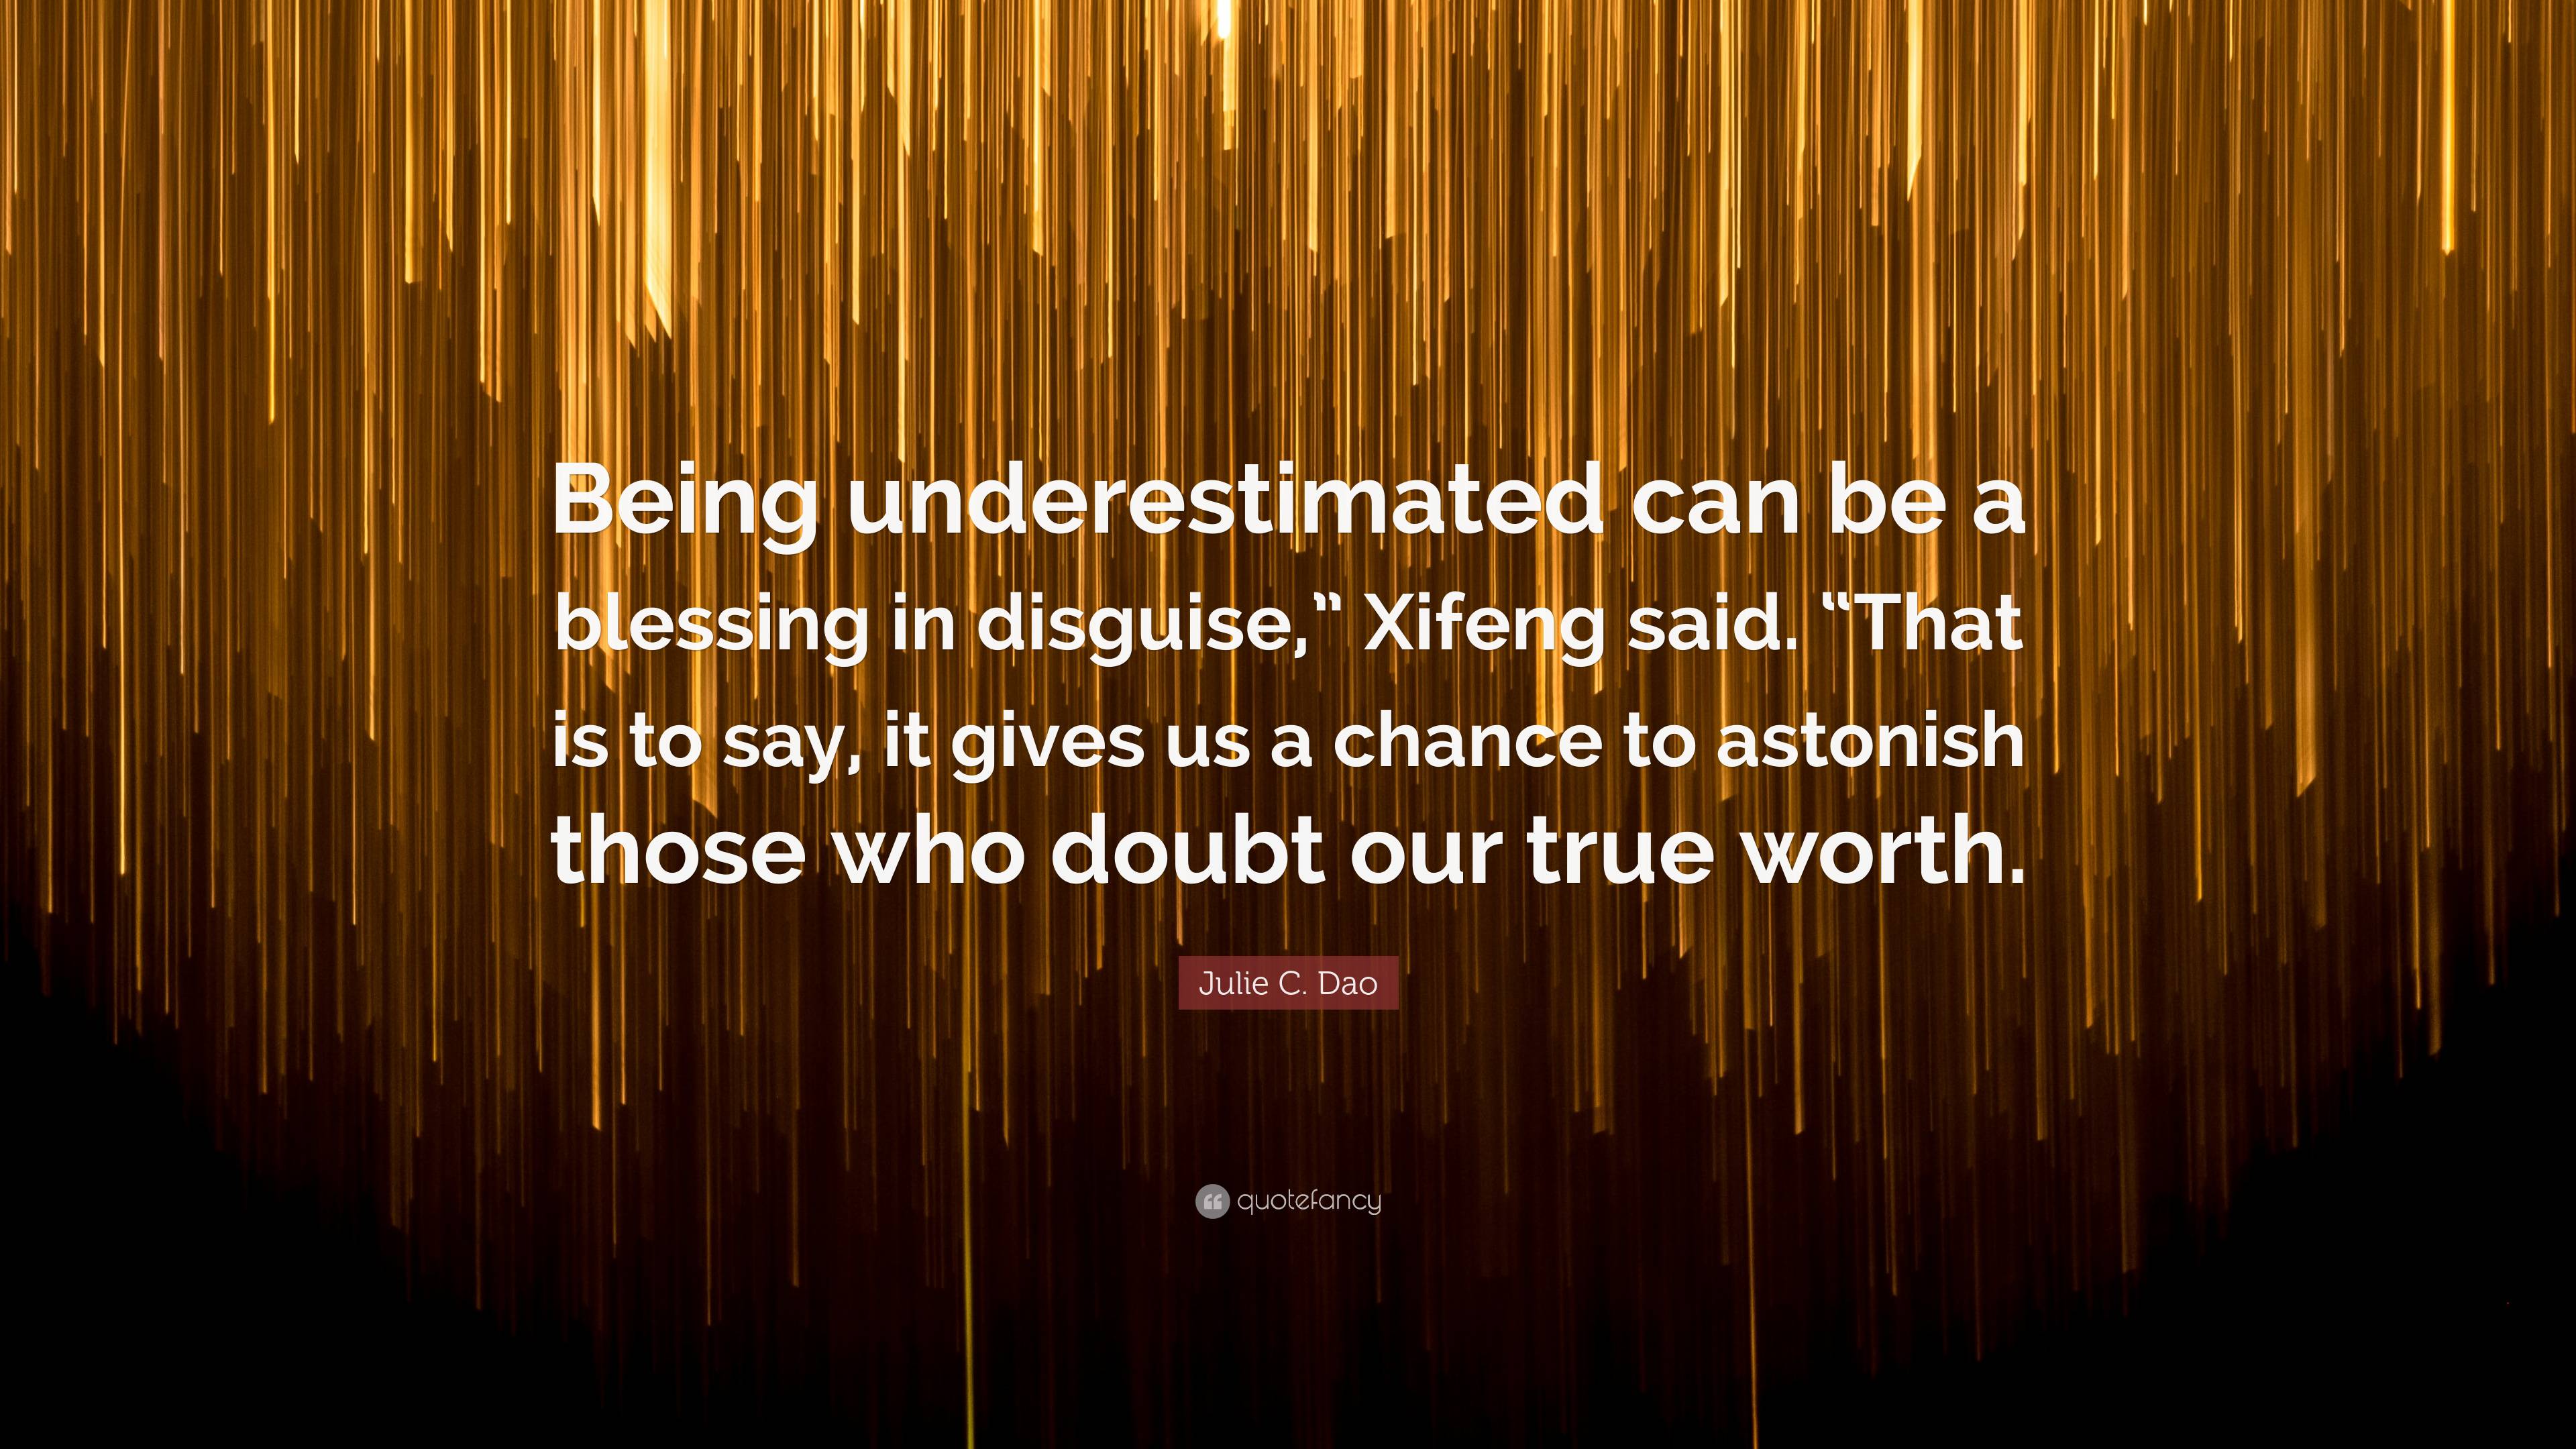 Julie C. Dao Quote: “Being underestimated can be a blessing in disguise ...